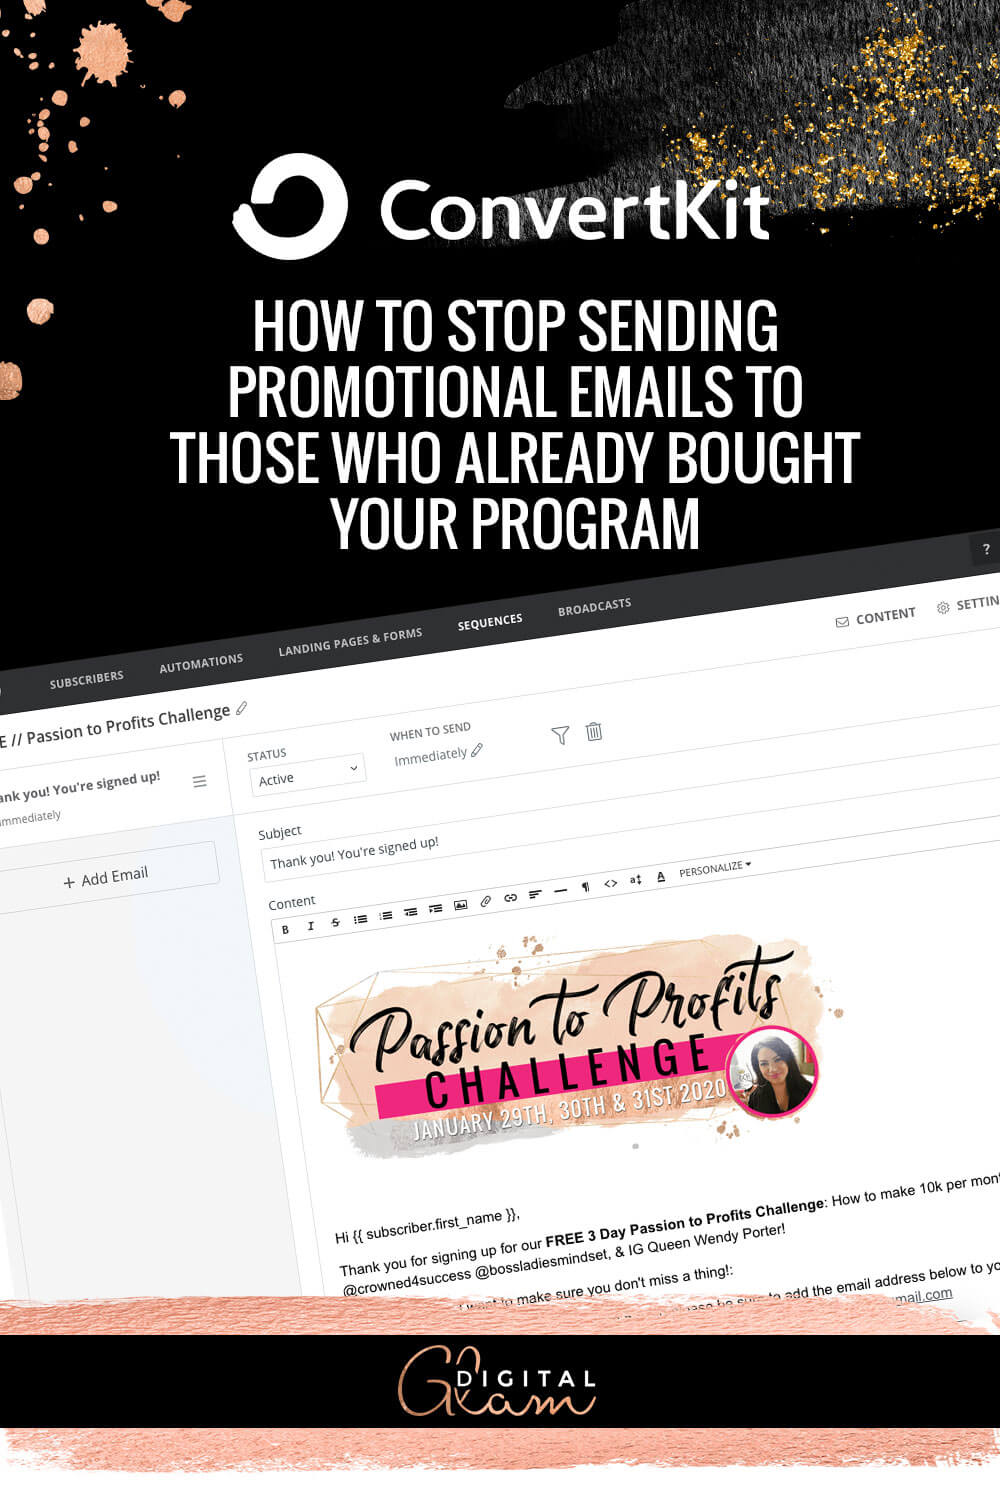 [CONVERTKIT] How to stop sending promotional emails to those who already bought your program